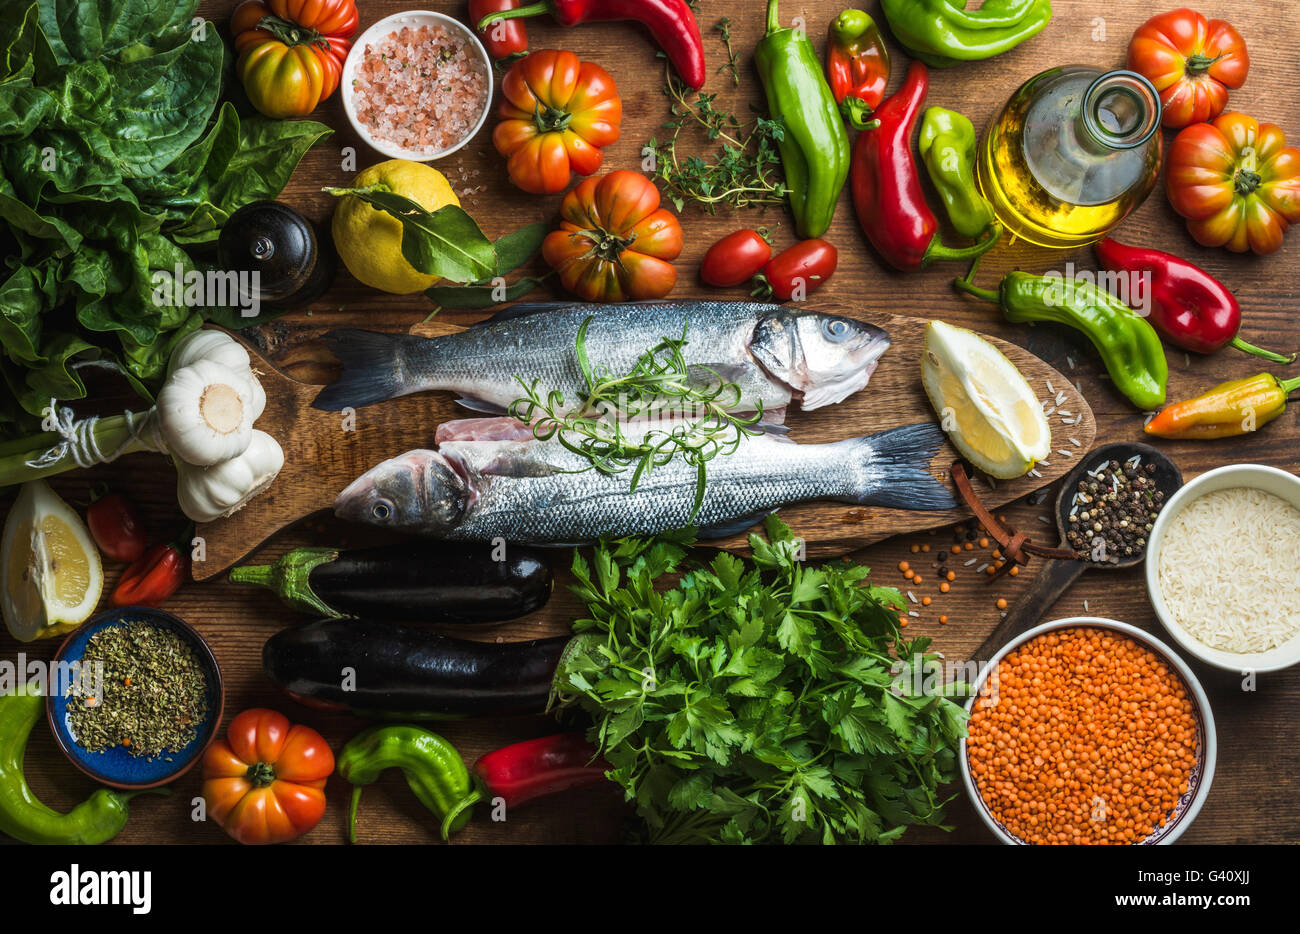 Raw uncooked seabass fish with vegetables, grains, herbs and spices on chopping board over rustic wooden background, top view Stock Photo